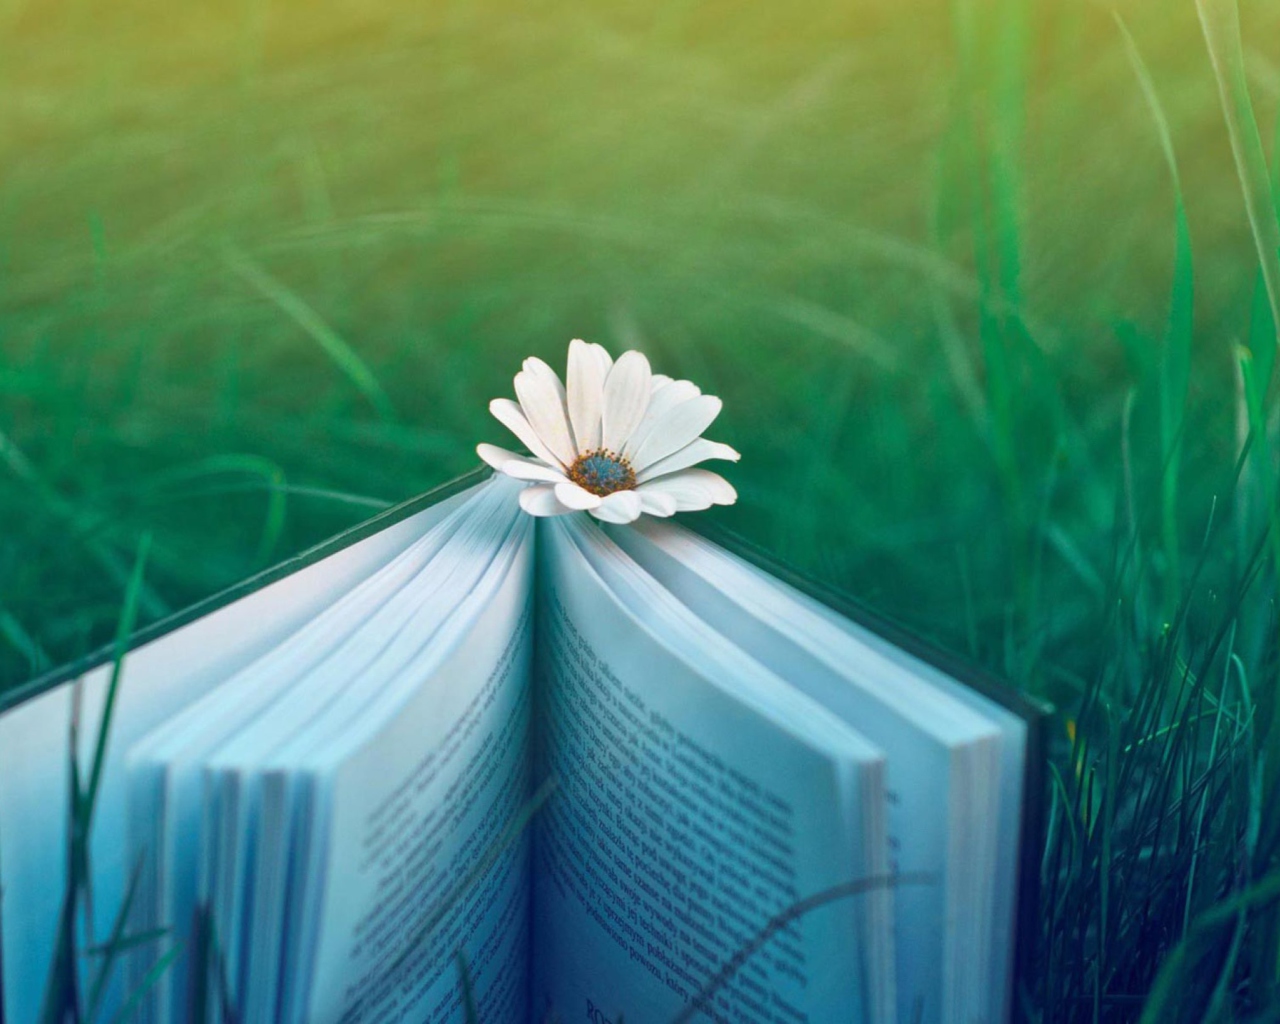 Flower And Book wallpaper 1280x1024